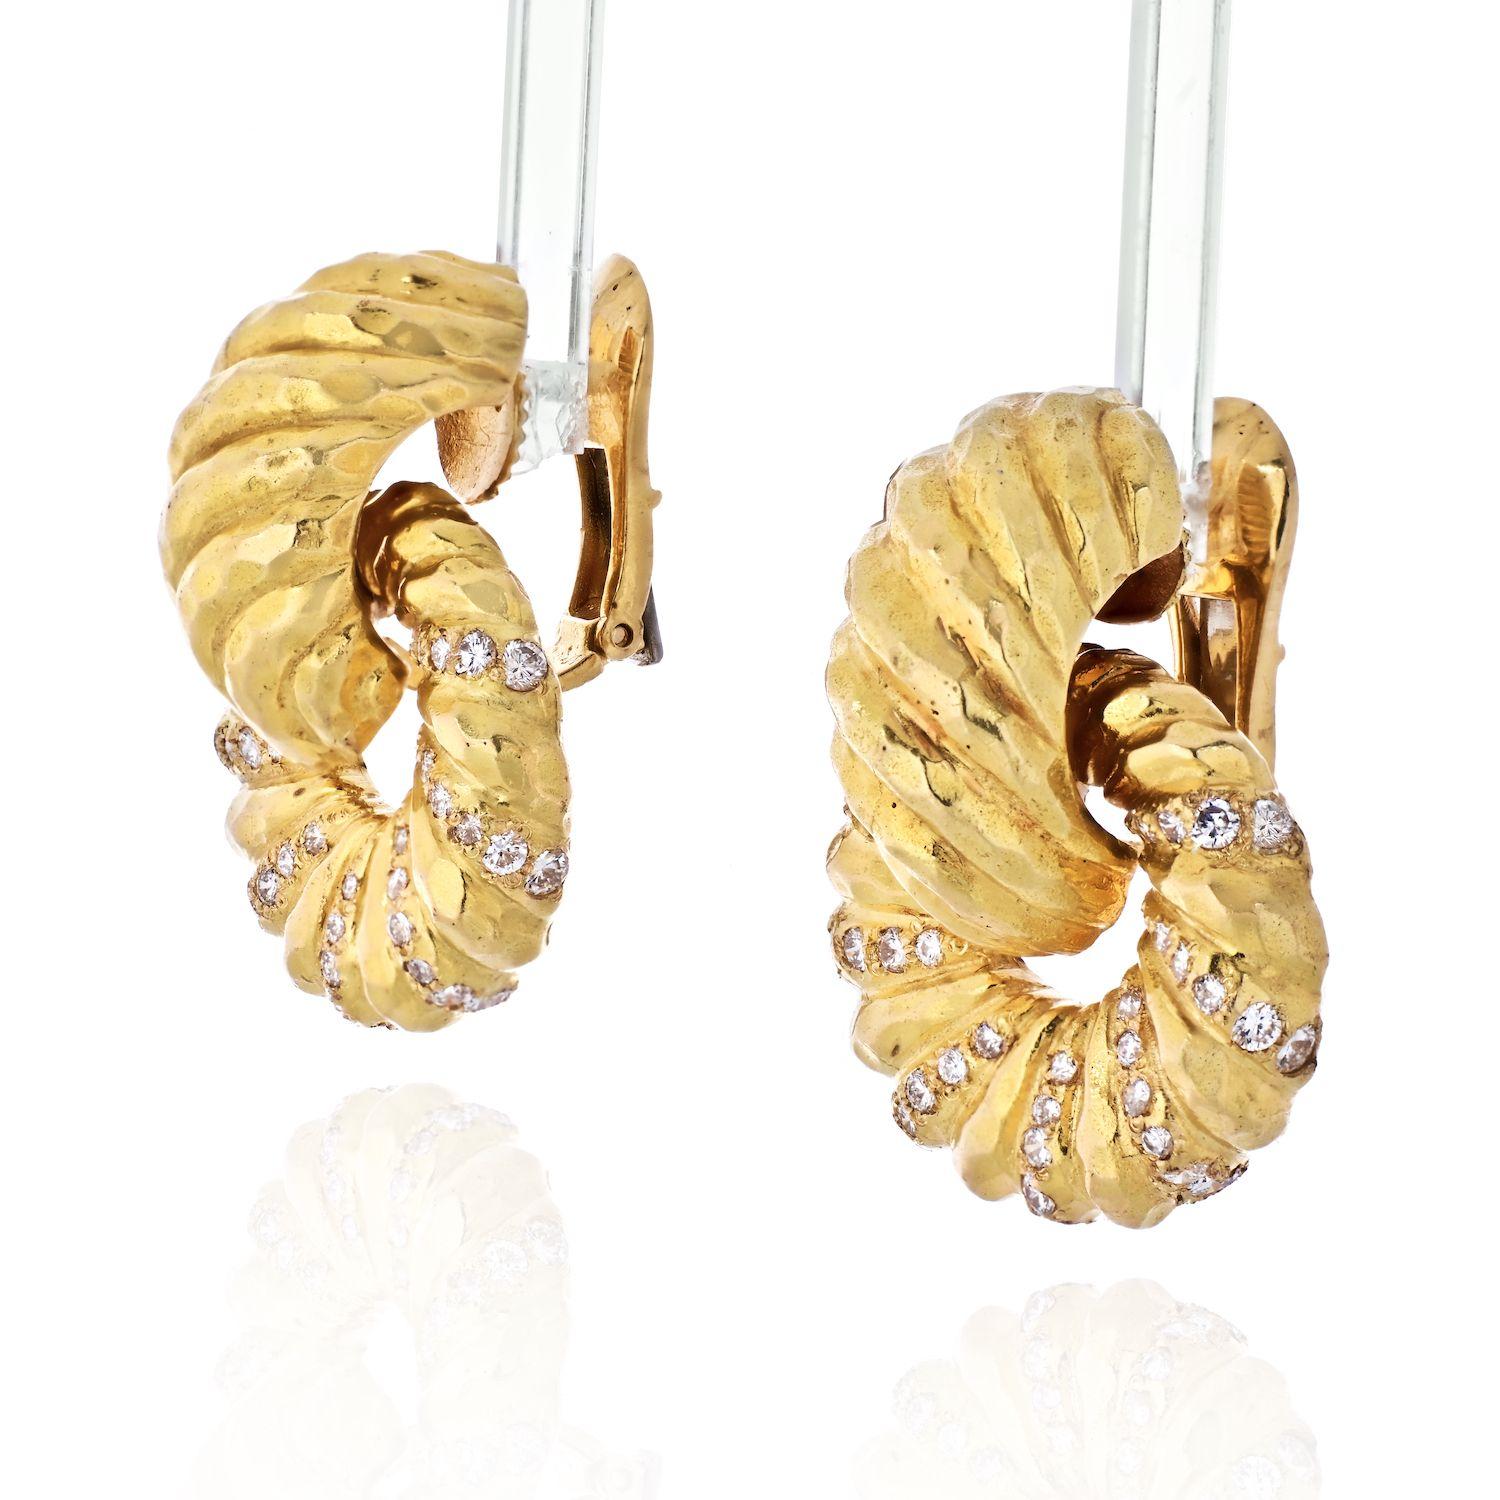 Styled as medium size yellow gold door knockers these ear clips are perfect for someone who enjoys gold with a little bit of parkle. Designed by David Webb, American estate jeweler, these style of earrings is as chic today as they were 50 years ago.